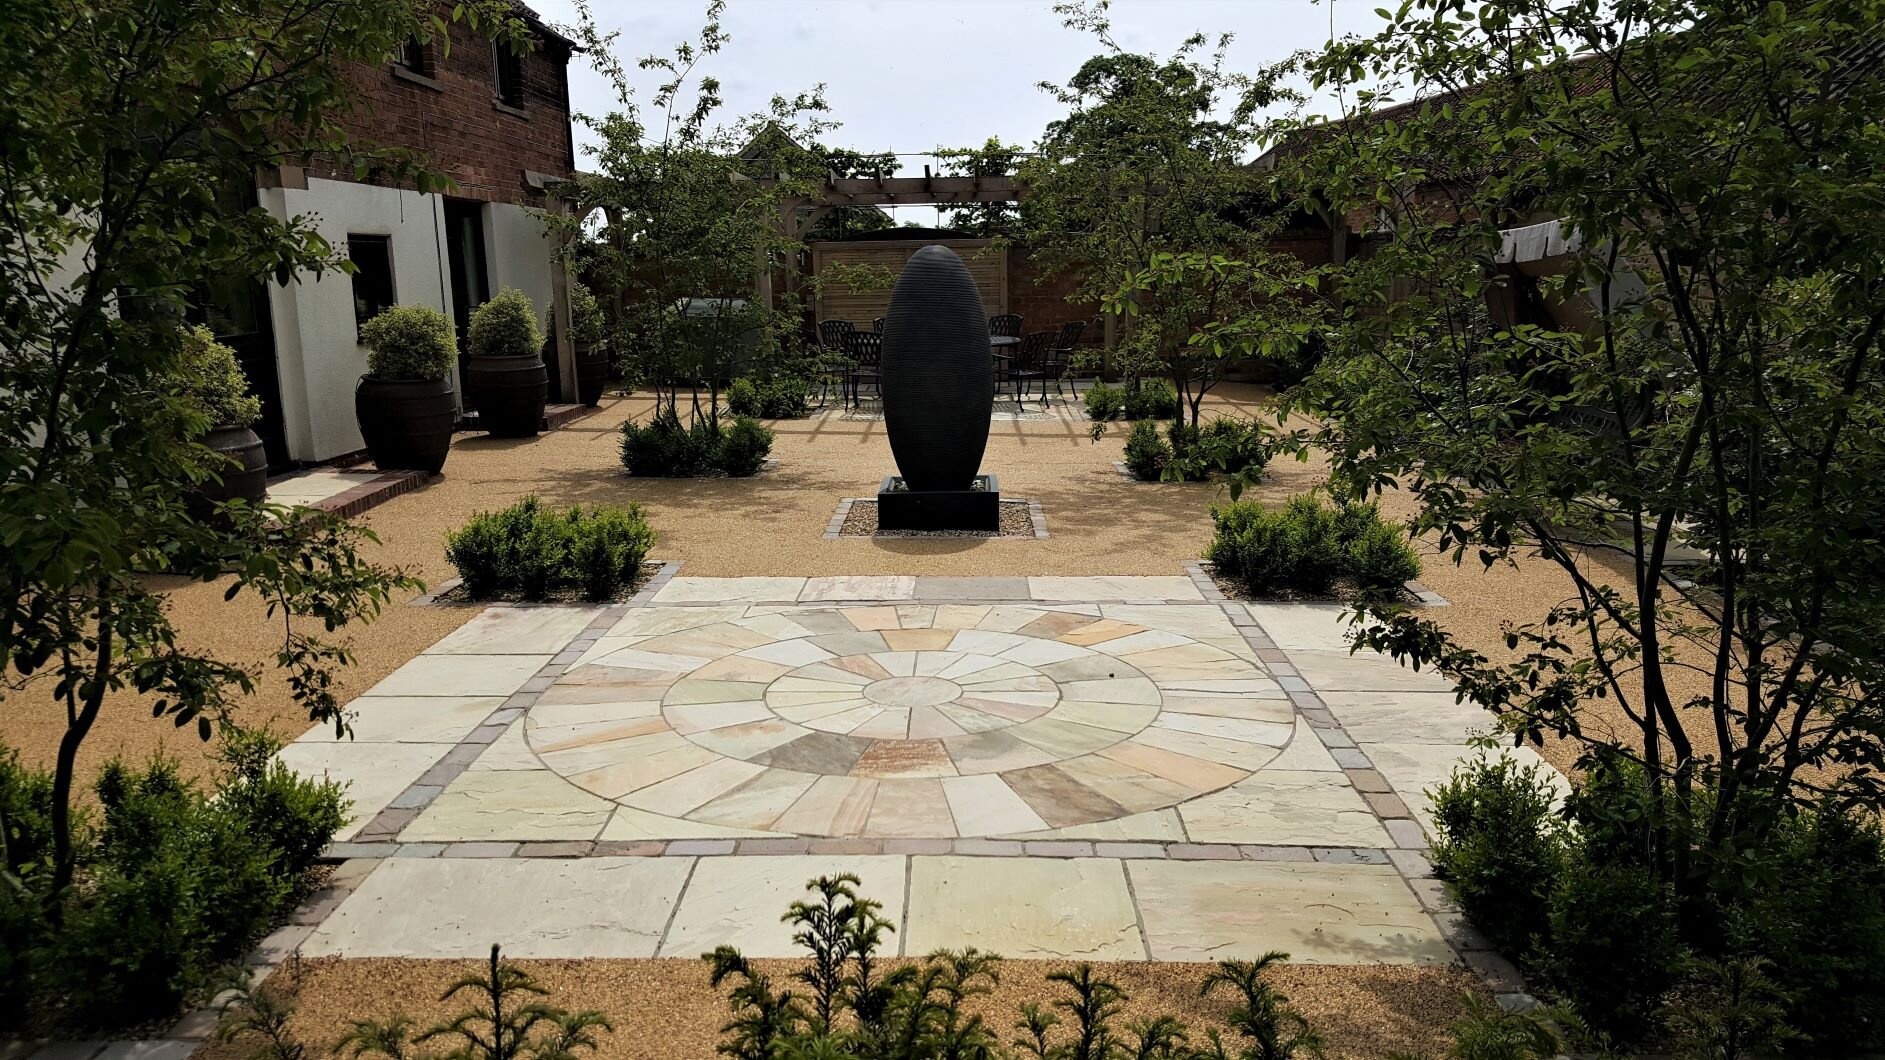 Paving and water feature in courtyard garden.jpg